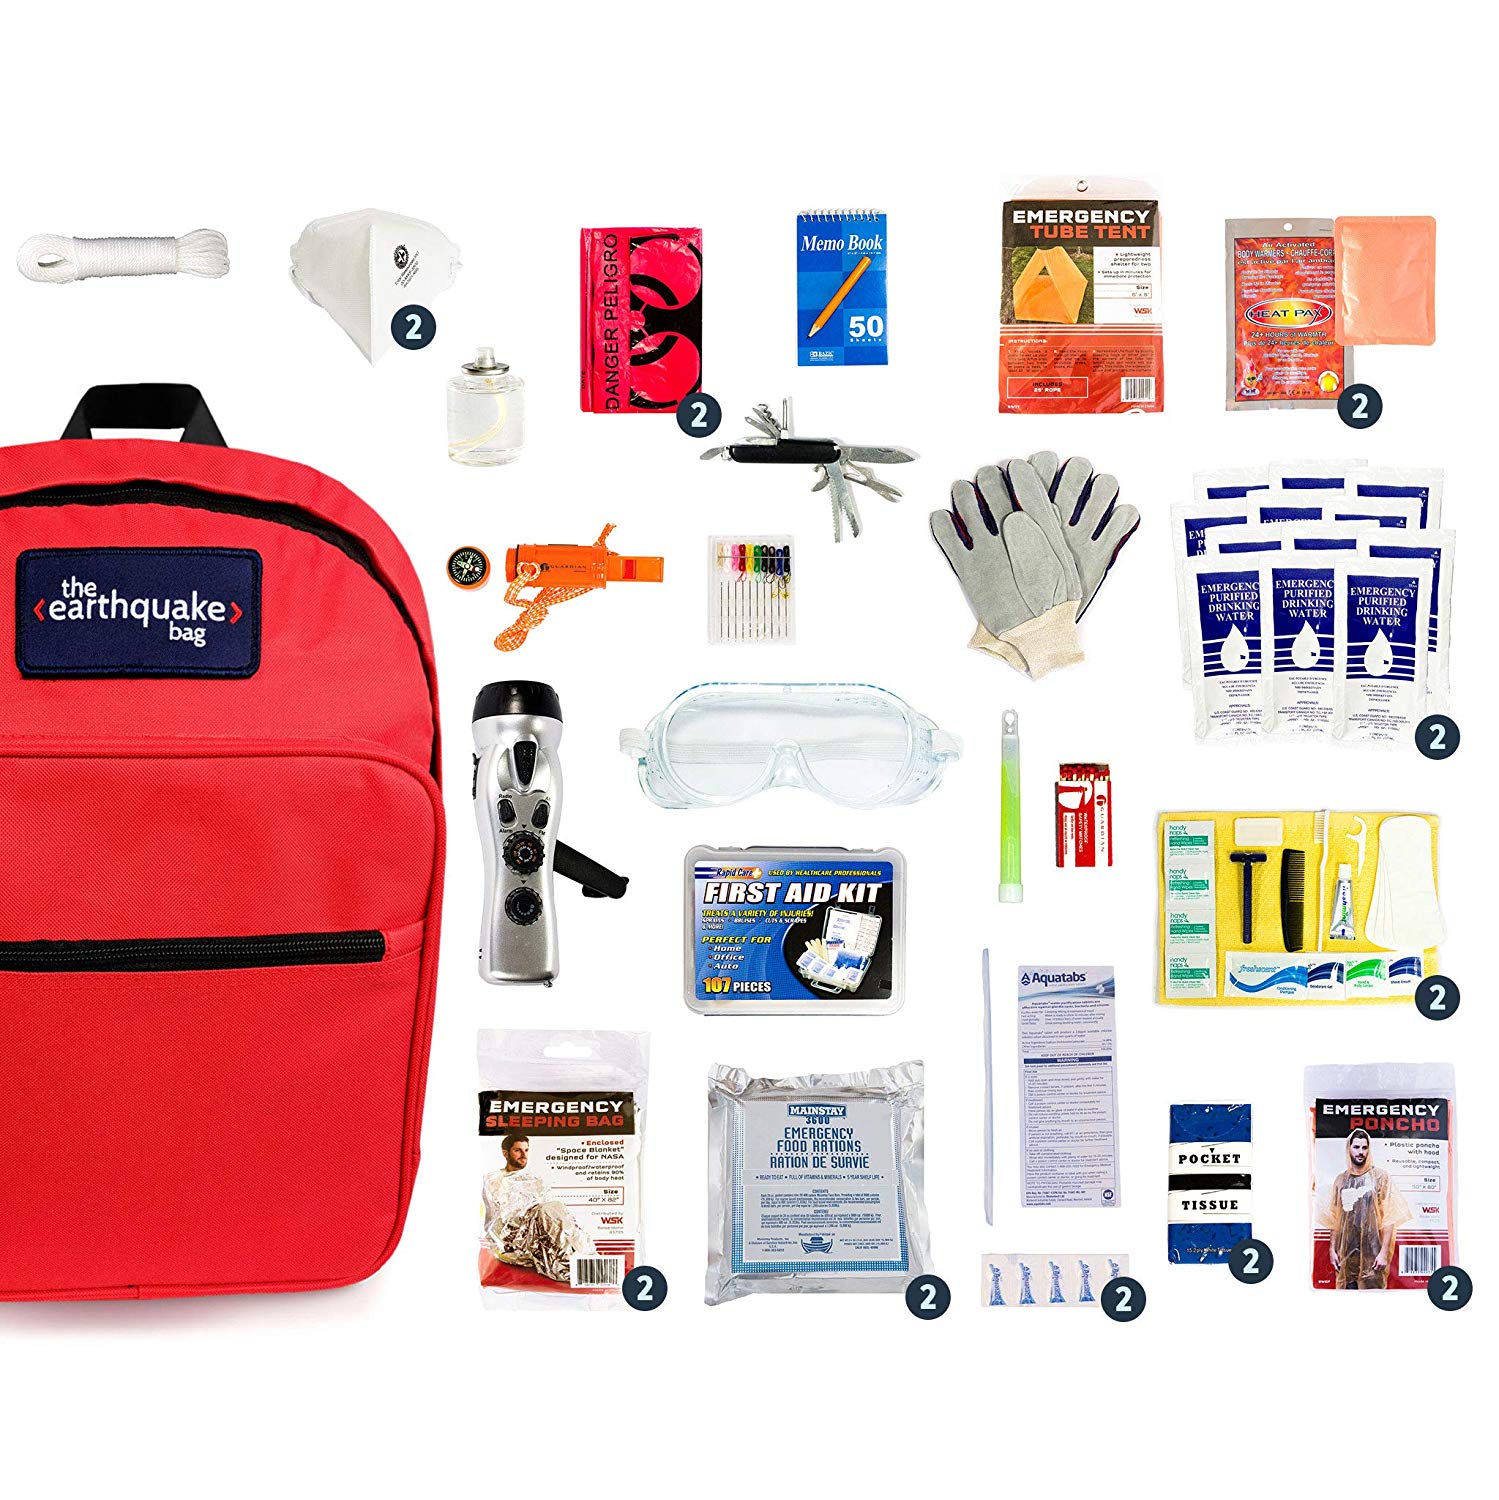 Complete Earthquake Bag - Emergency kit for Earthquakes, Hurricanes, floods + Other disasters